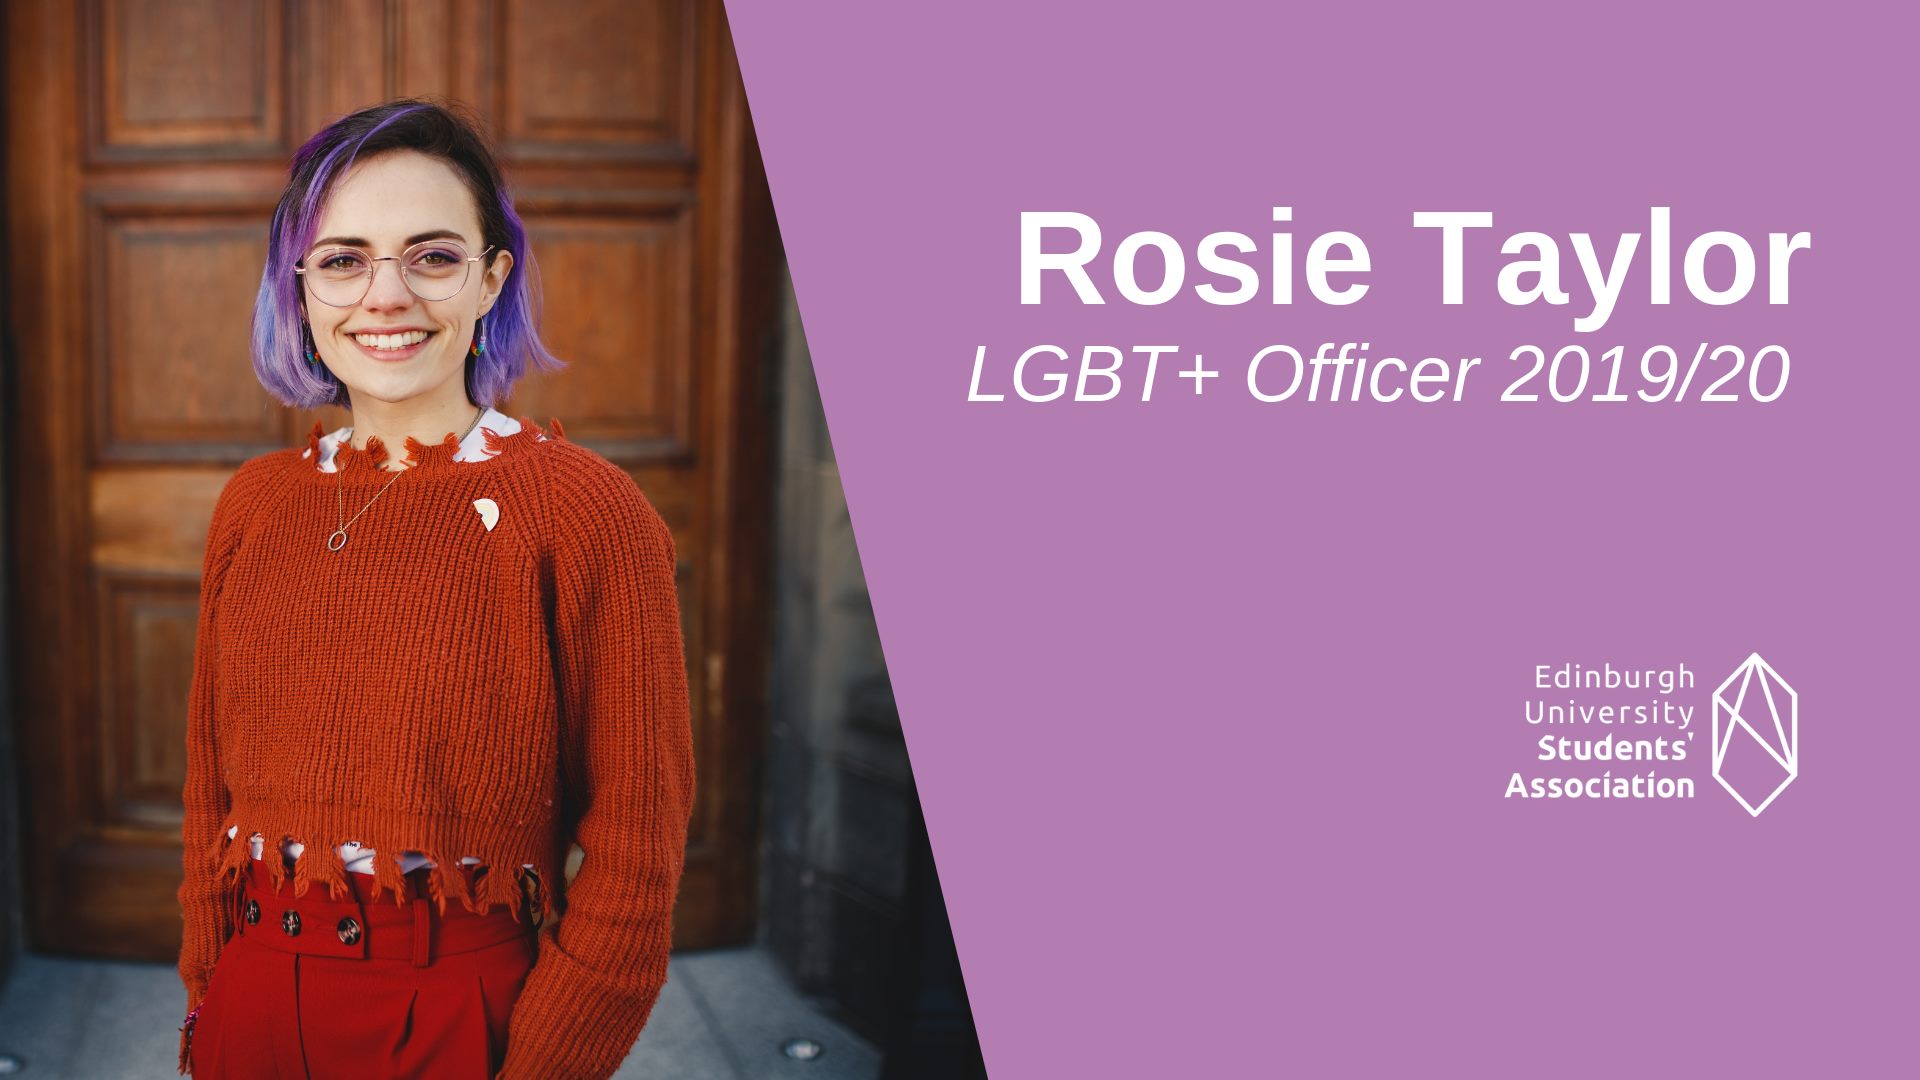 Photo of Rosie Taylor, LGBT+ Officer 2019/20